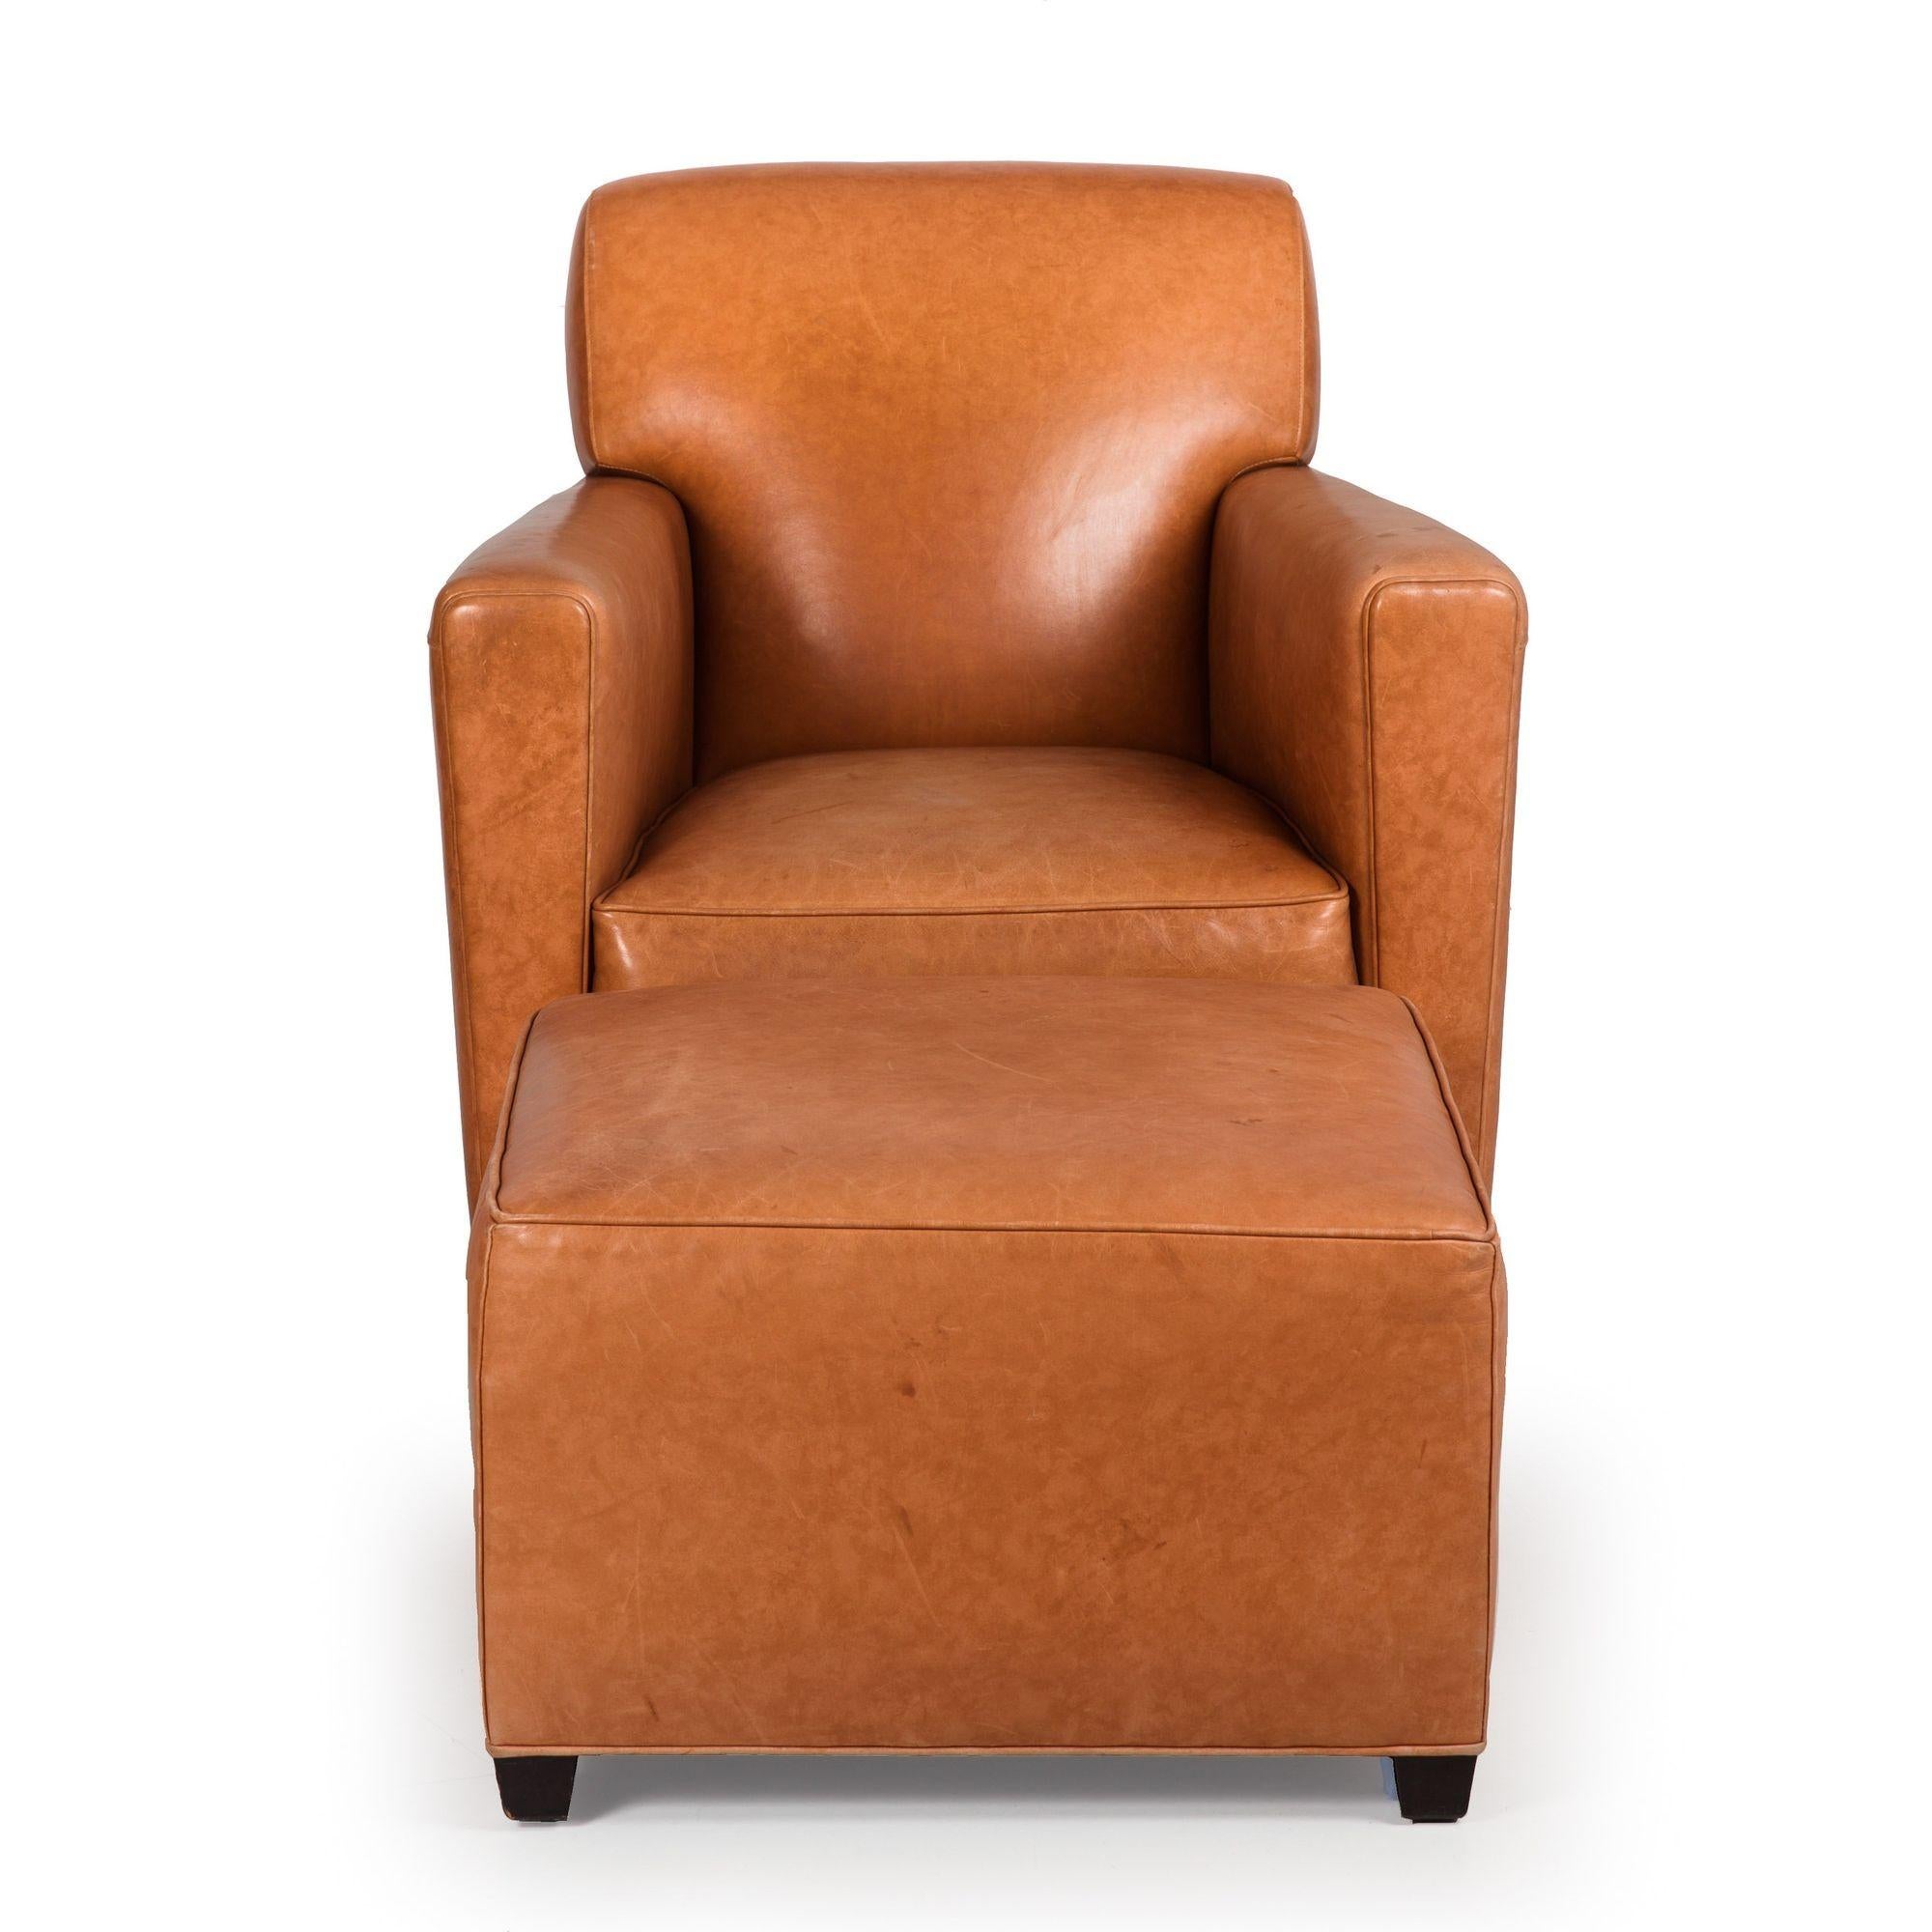 A very sleek club chair and matching ottoman designed with a nod to the elegance of the Art Deco era, the attached back and seat presenting a unified and crisply tailored appearance. The tight back rests on a generous cube seat, defined by slight